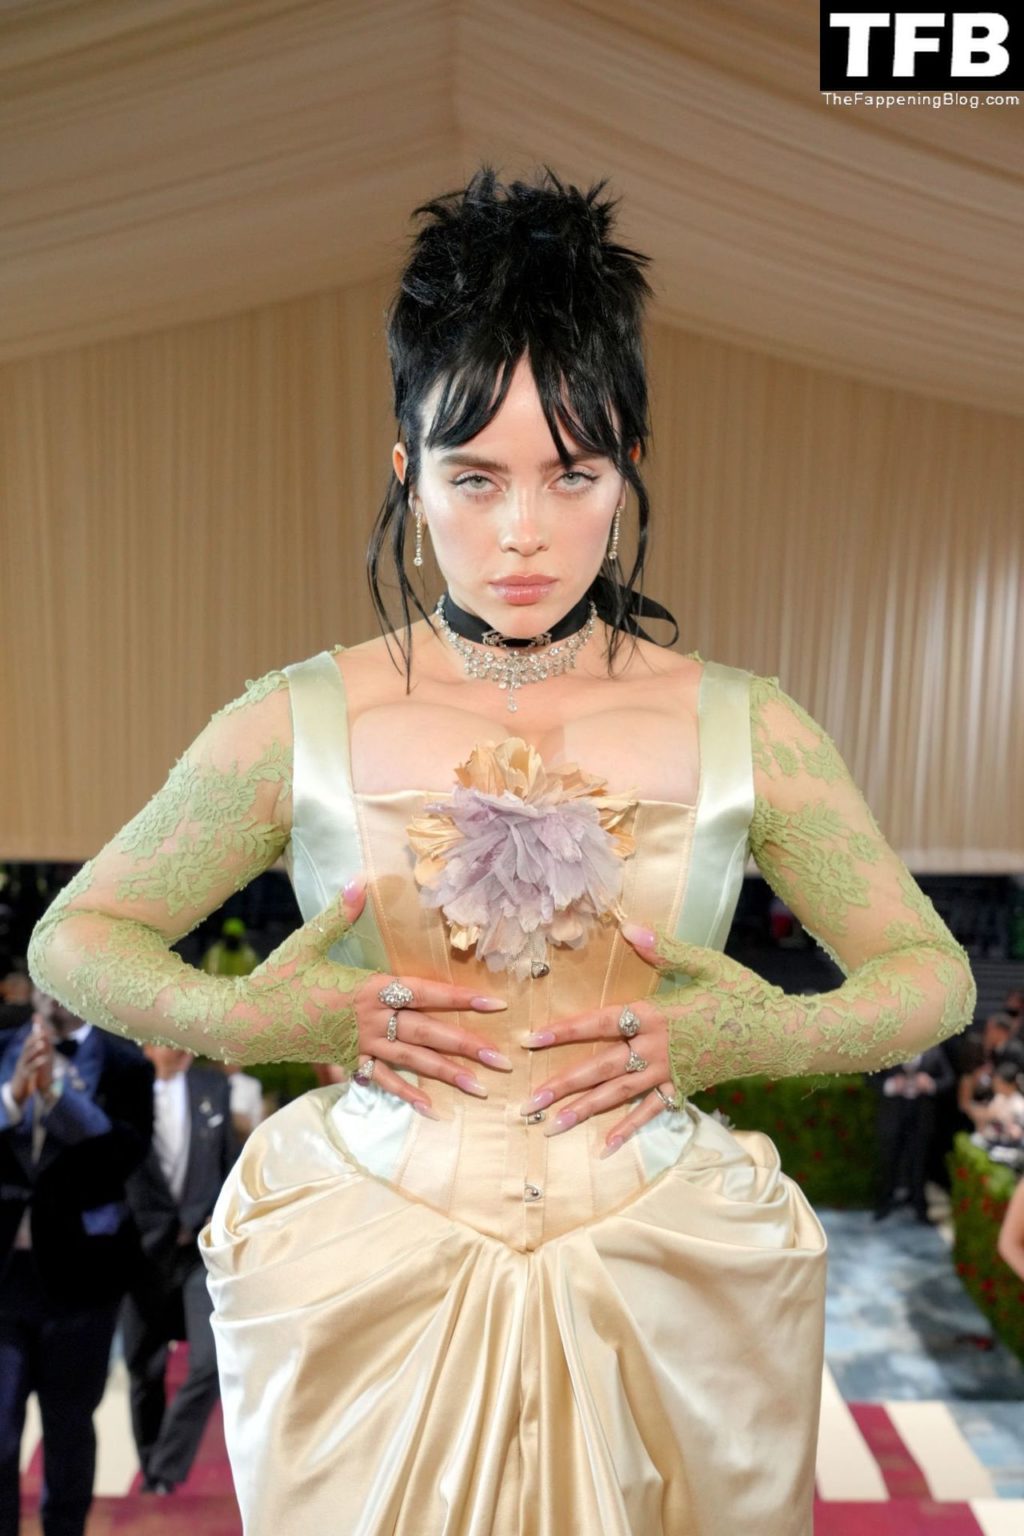 Billie Eilish Sexy The Fappening Blog 70 1024x1536 - Billie Eilish Showcases Nice Cleavage at The 2022 Met Gala in NYC (155 Photos)